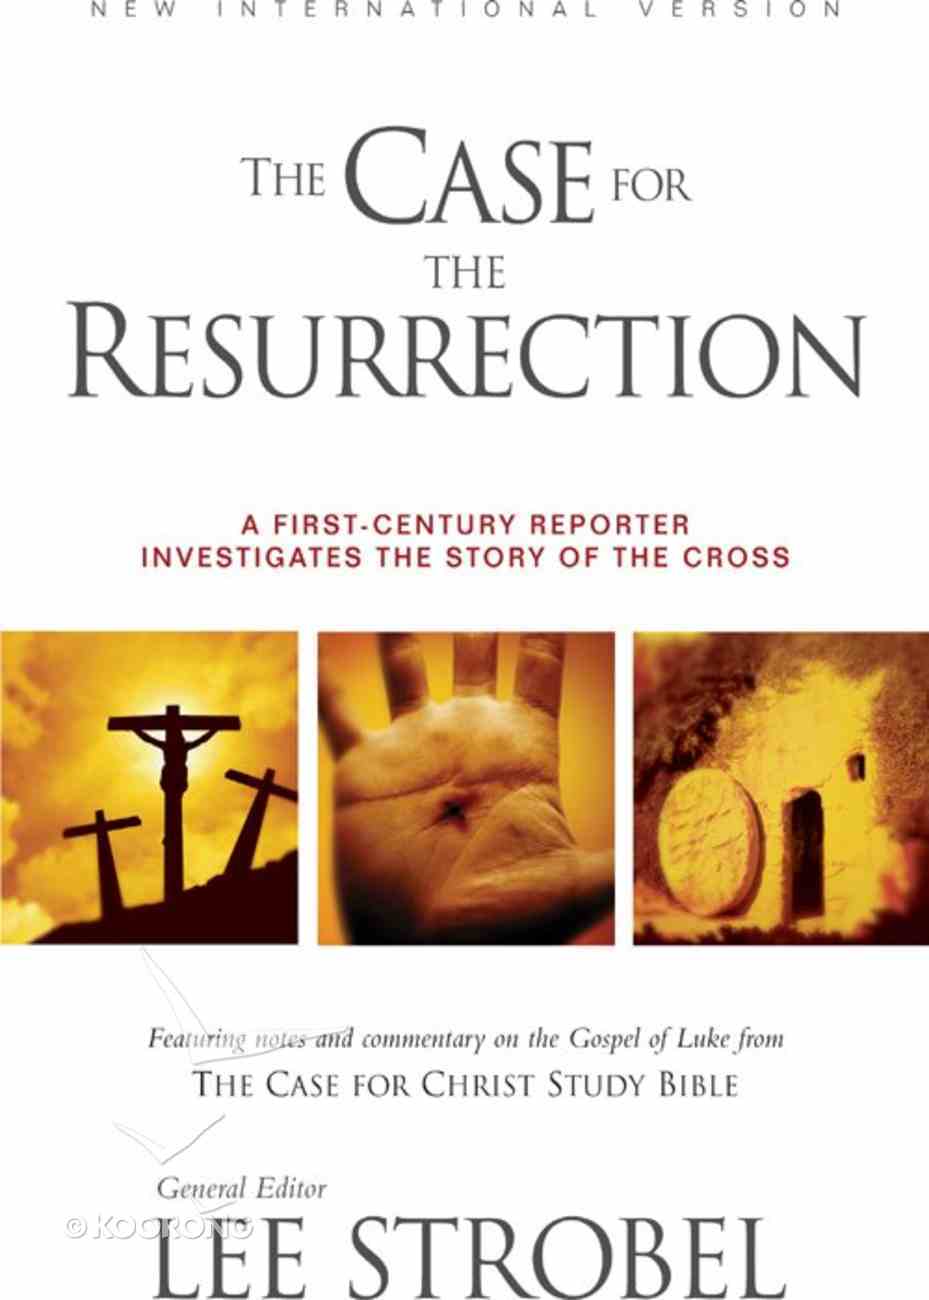 The Case For the Resurrection eBook